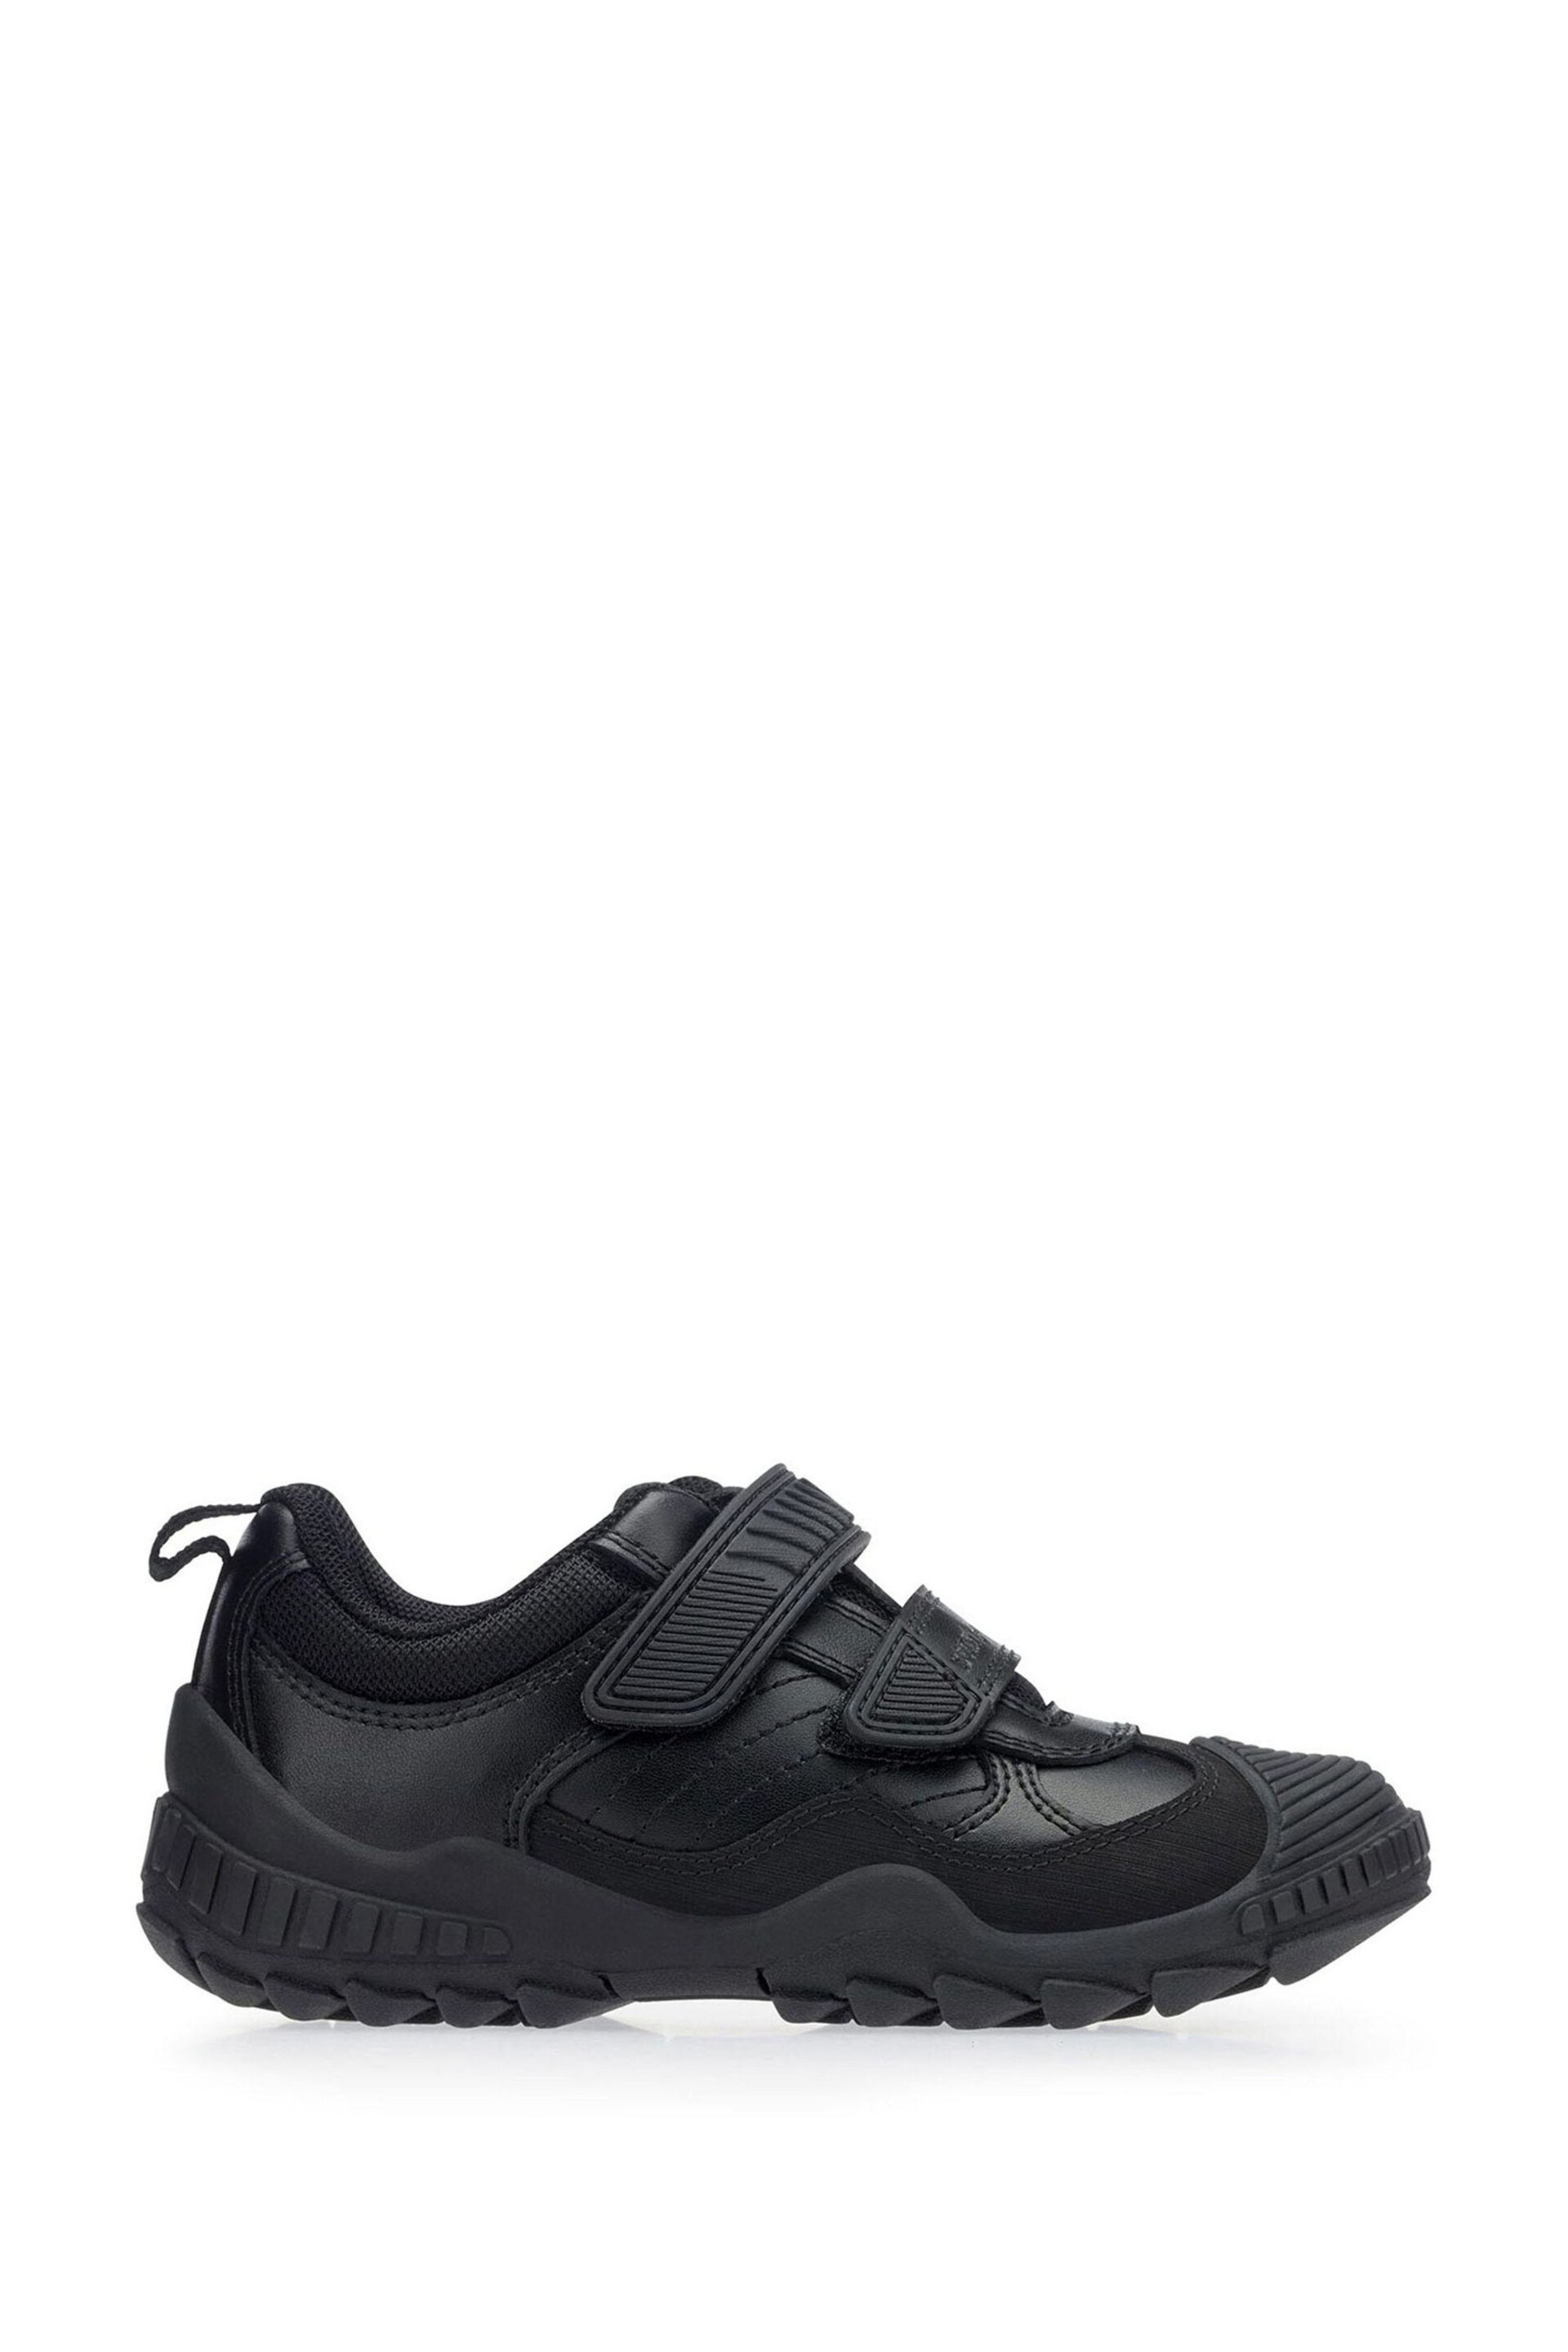 Start-Rite Extreme Pri Black Leather School Shoes F Fit - Image 1 of 8